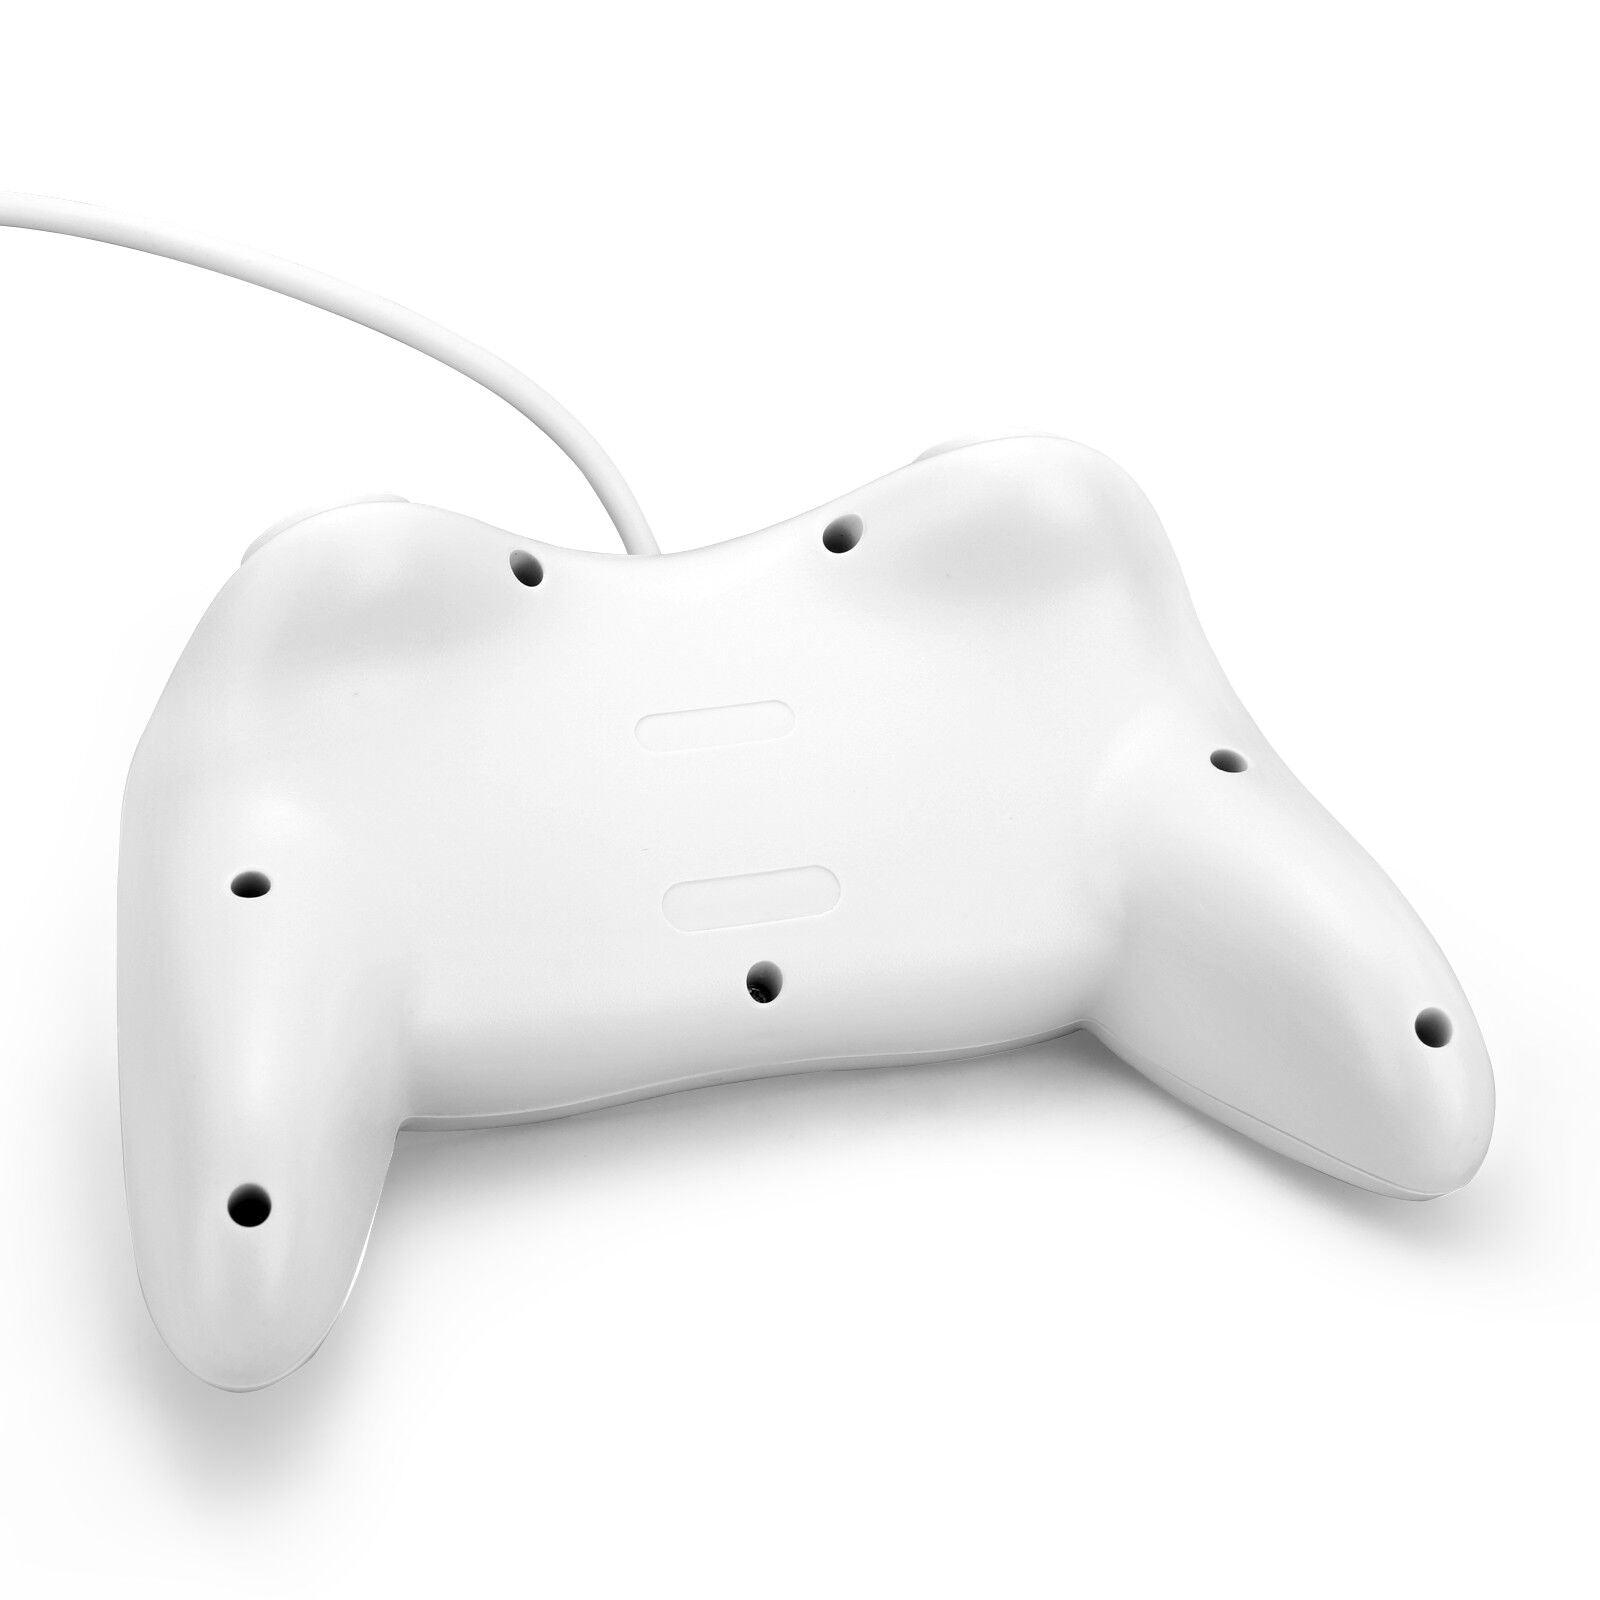 New White Classic Pro Wired GamePad Joypad Controller for Nintendo Wii Console - Office Catch